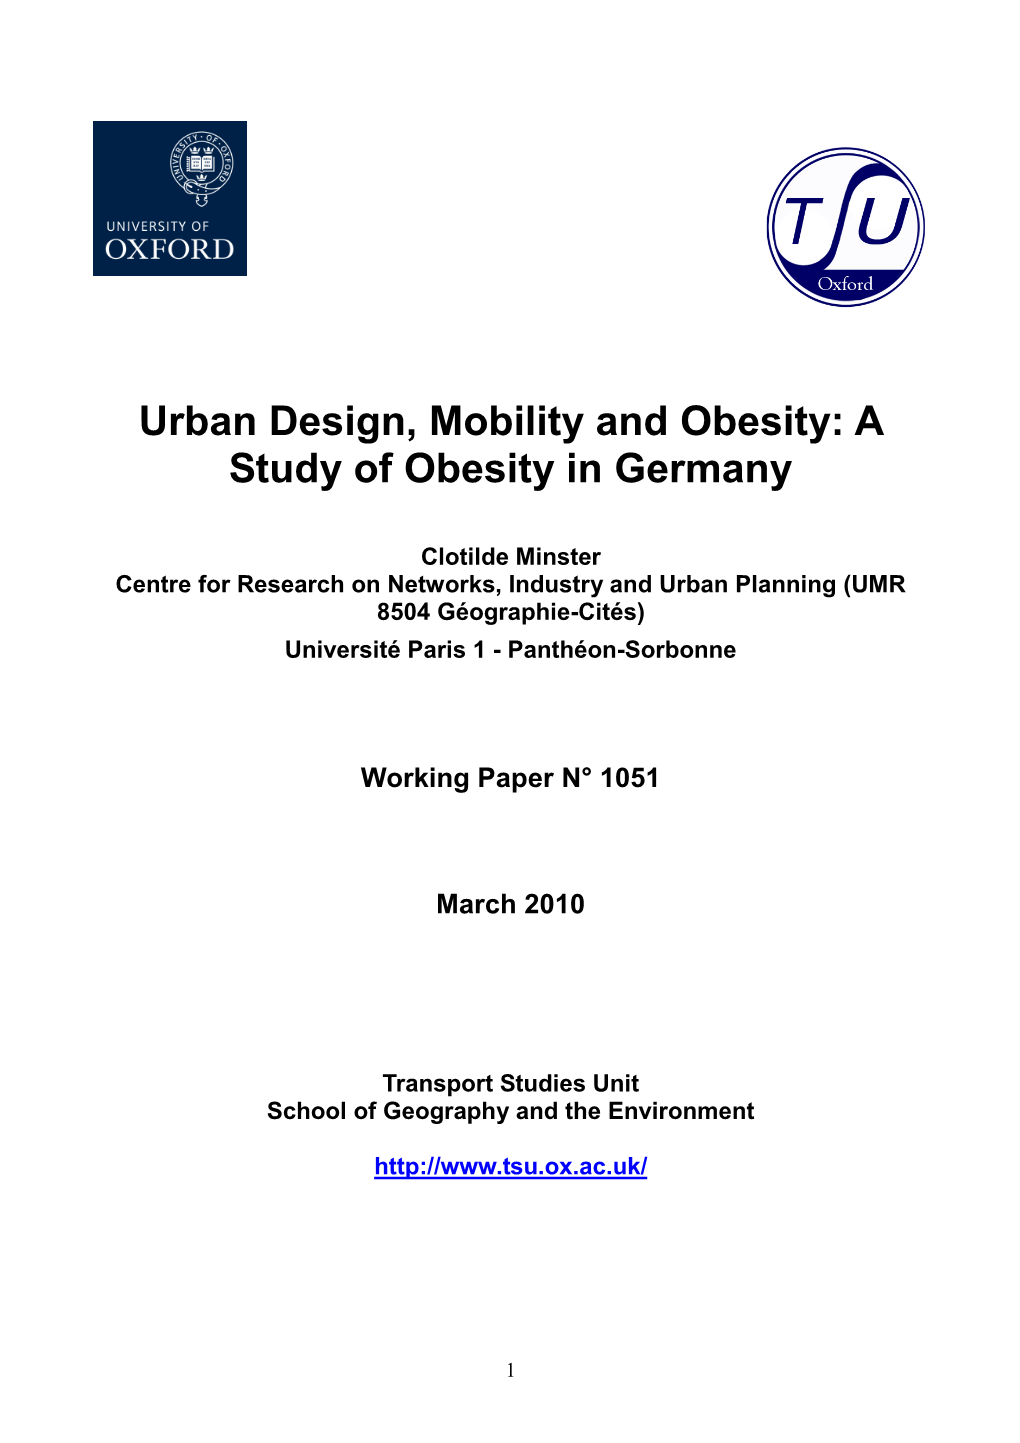 Urban Design, Mobility and Obesity: a Study of Obesity in Germany